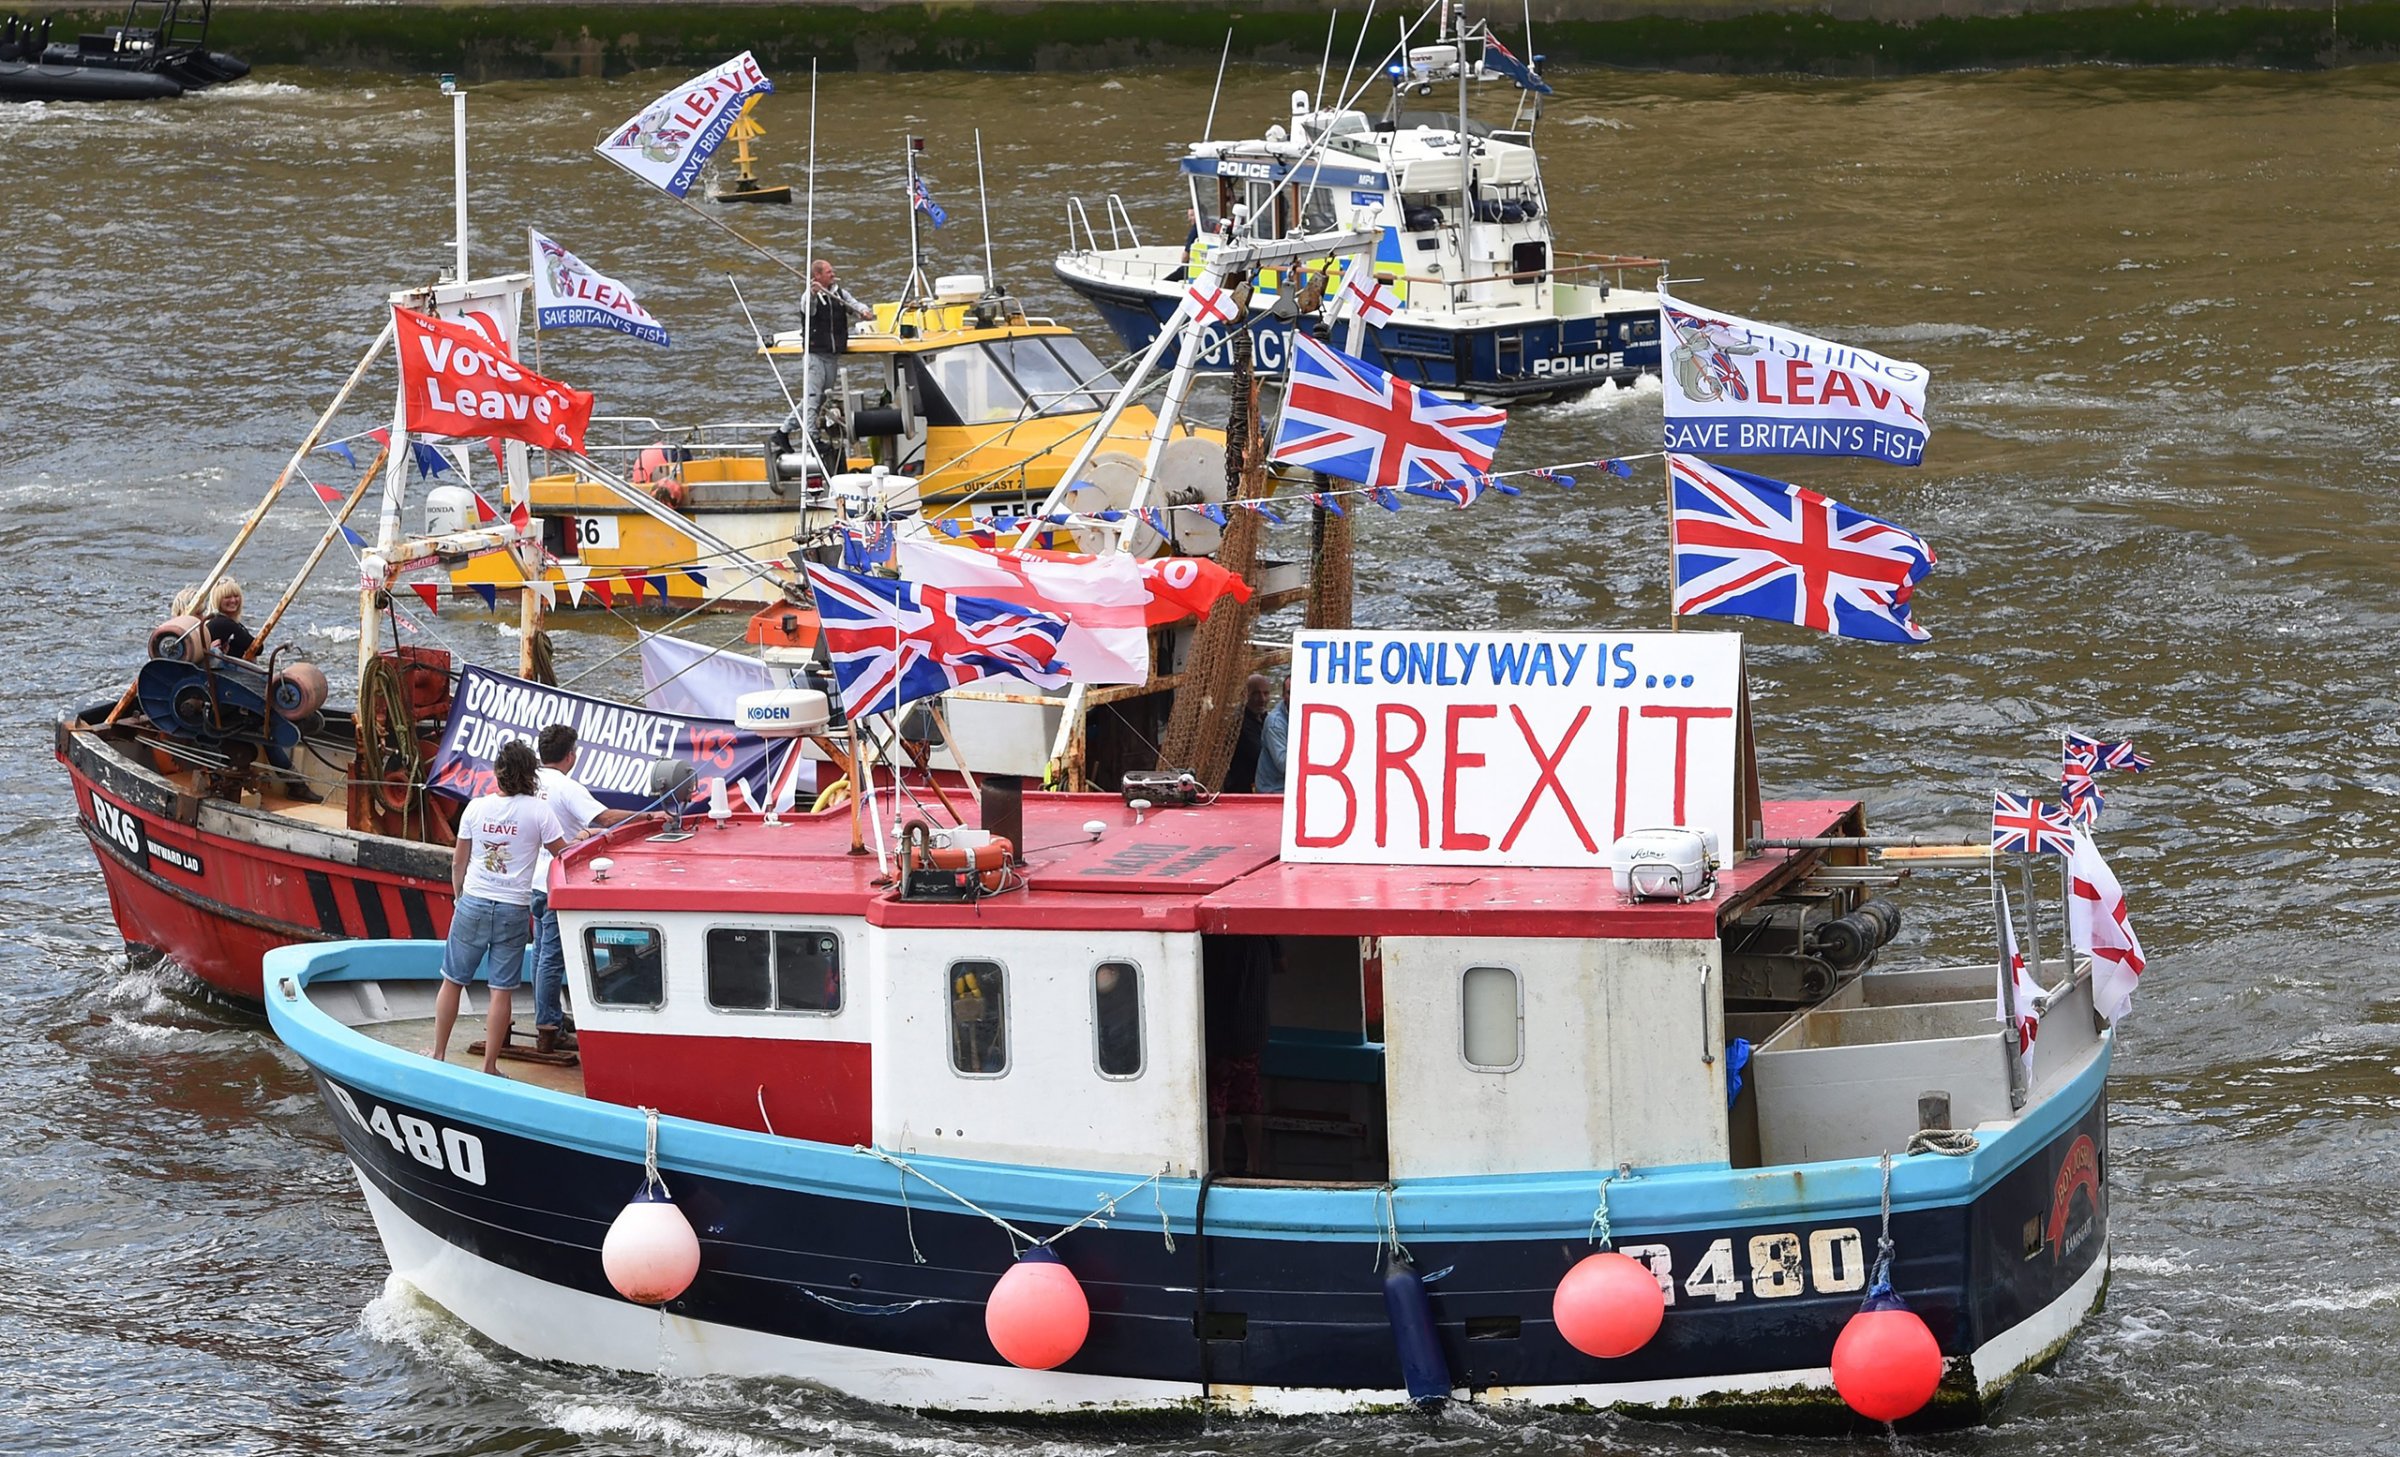 A flotilla of fishing trawlers, organized by UKIP leader Nigel Farage, sails up the river Thames next to the Houses of Parliament in London, June 15, 2016.